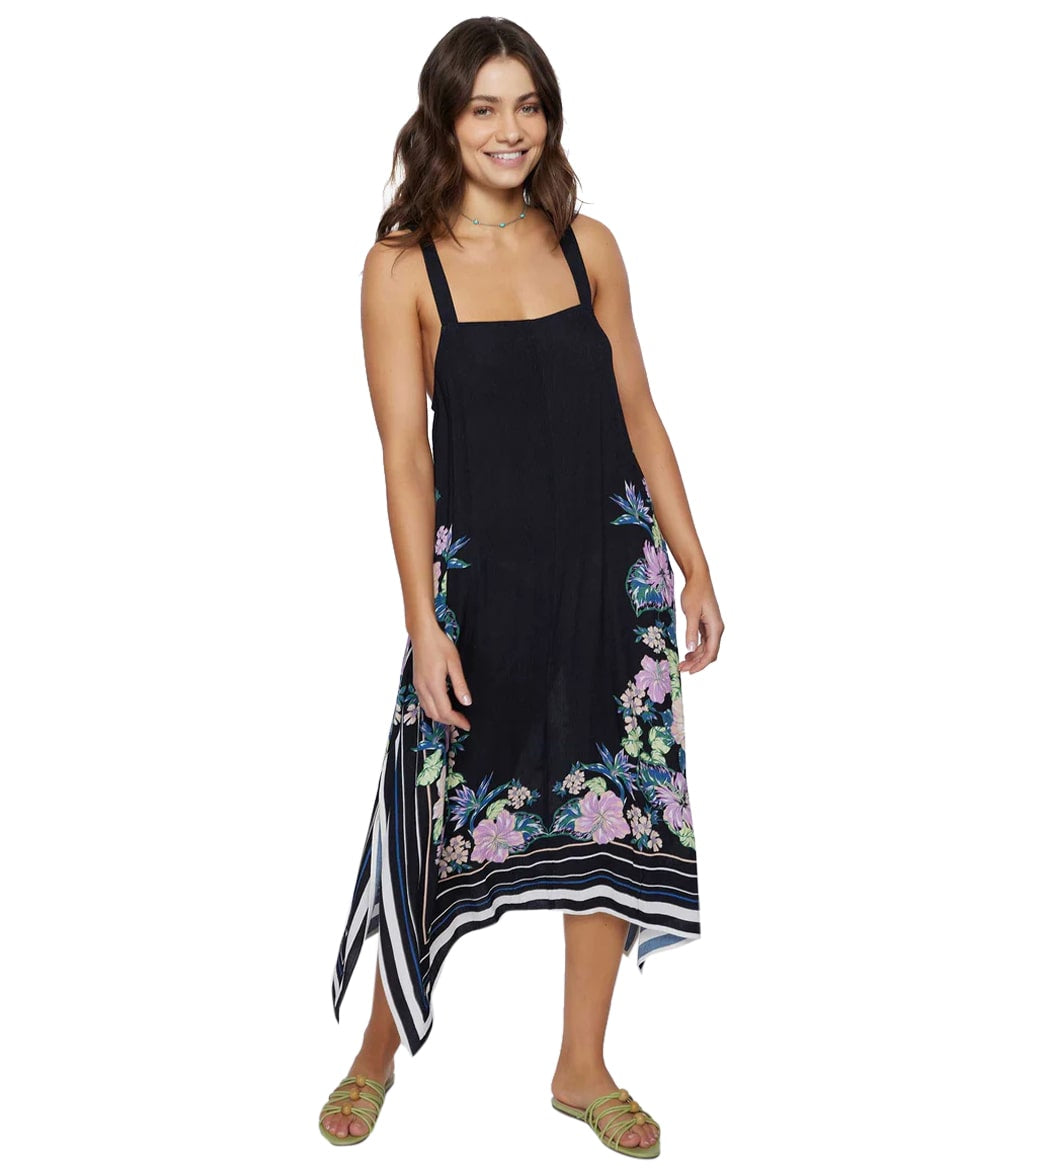 Rip Curl Women's Sun Dance Cover Up Dress at